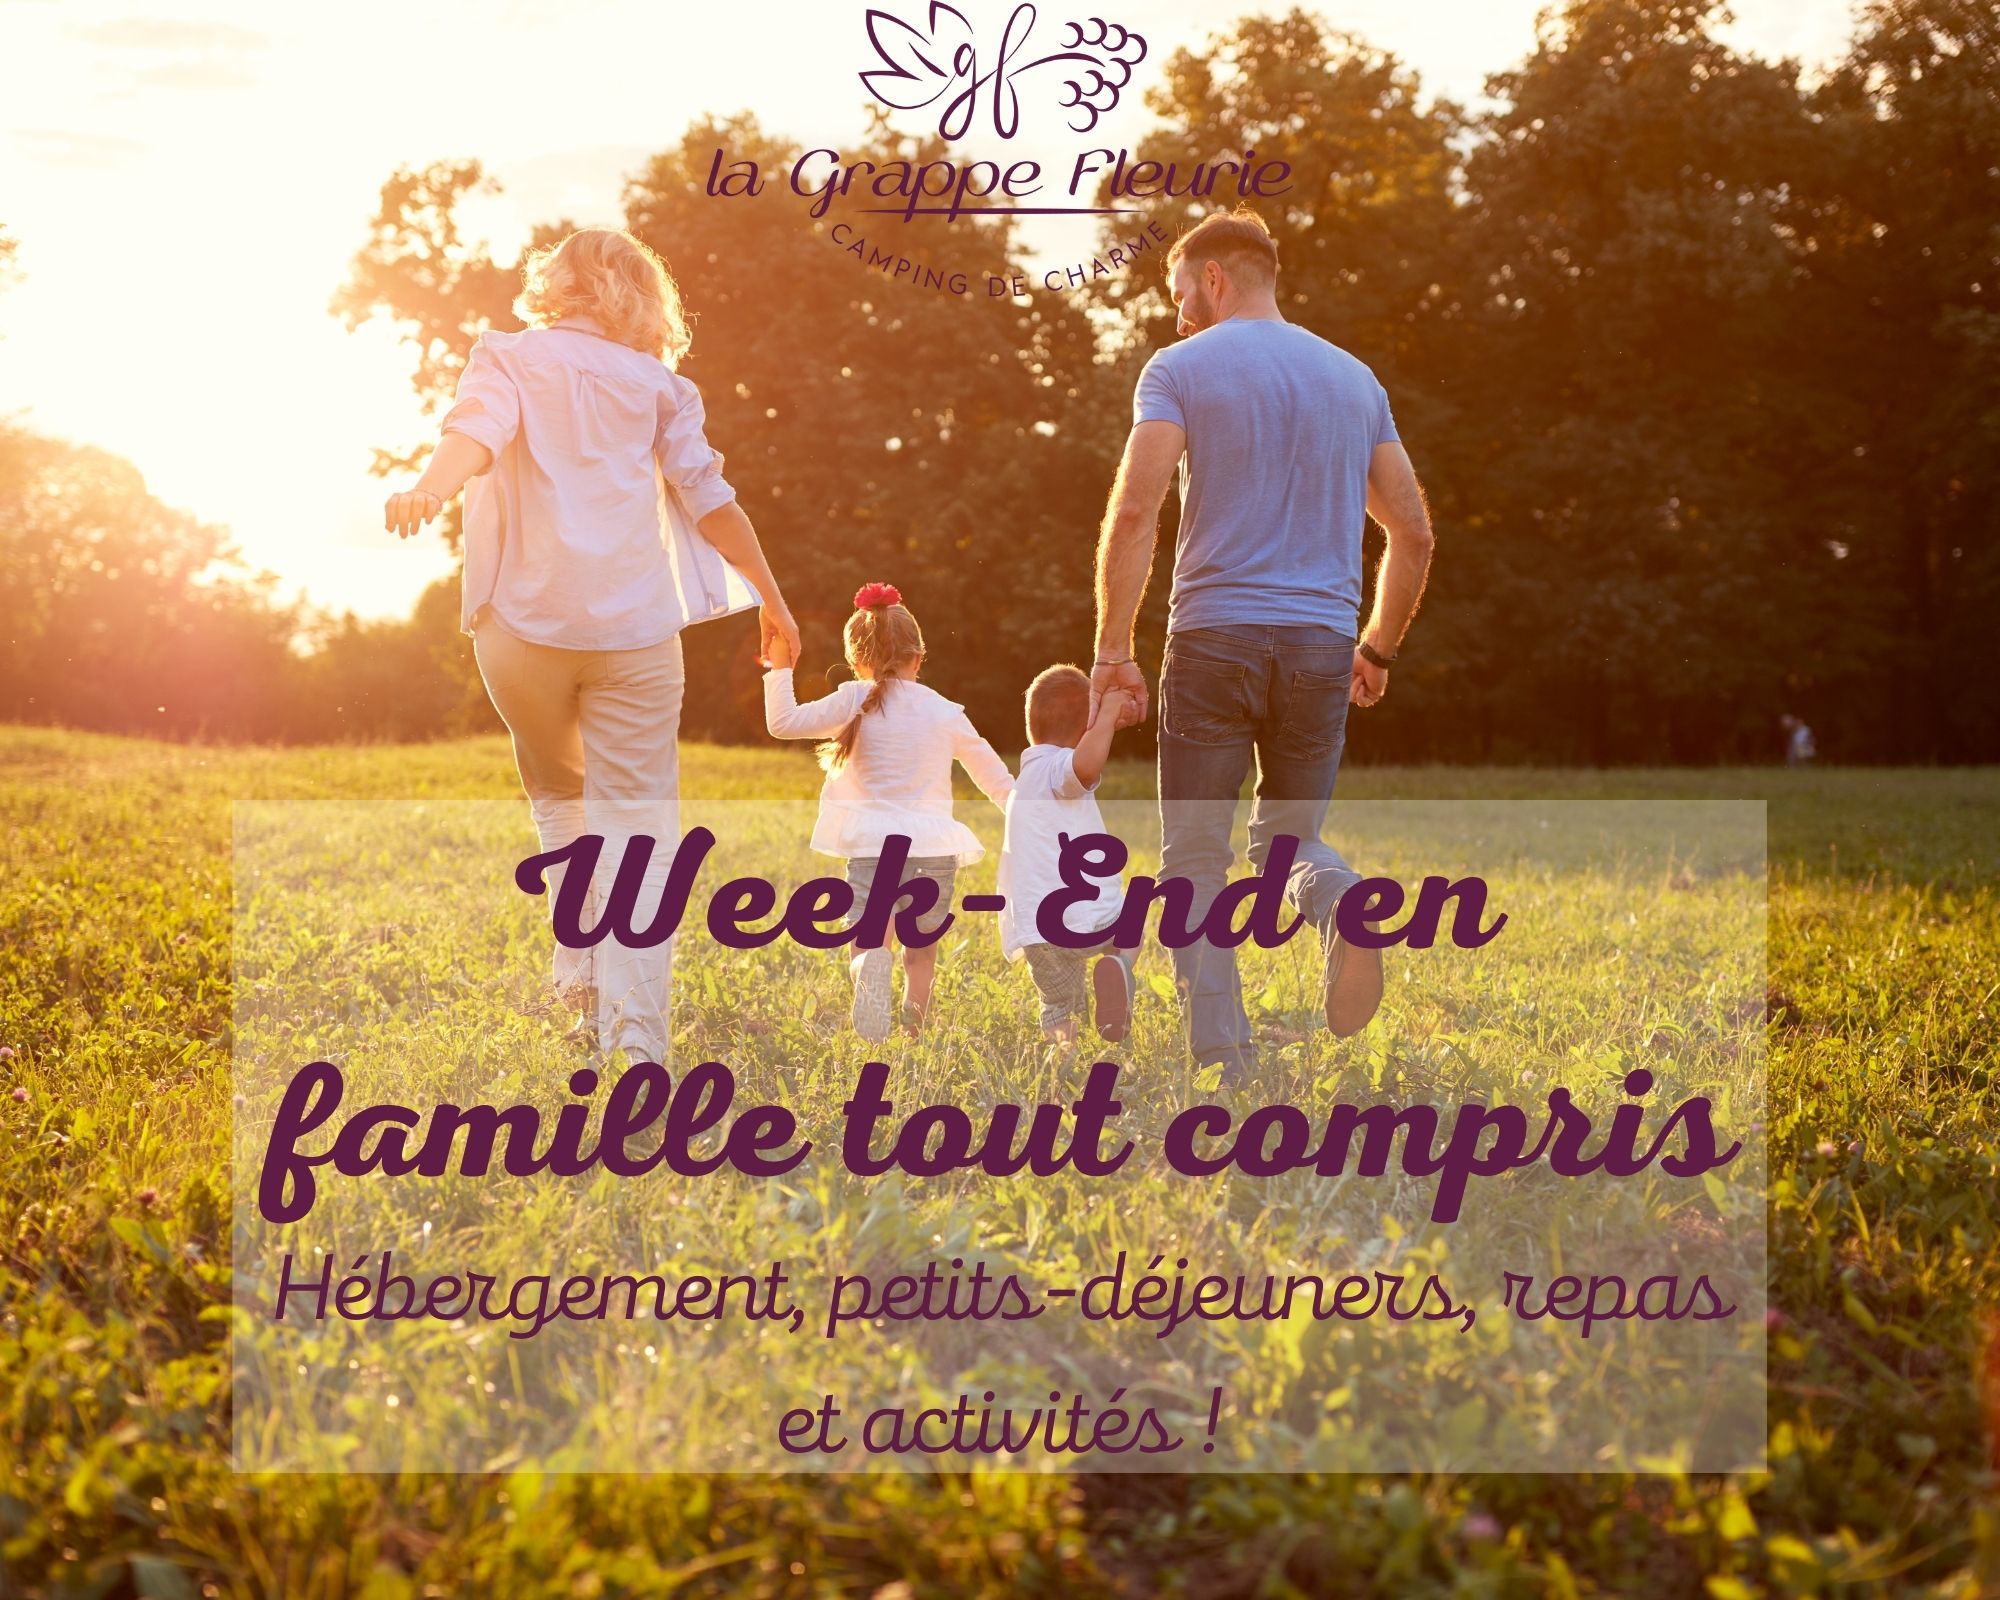 Accommodation - All-Inclusive Family Weekend! - Camping La Grappe Fleurie